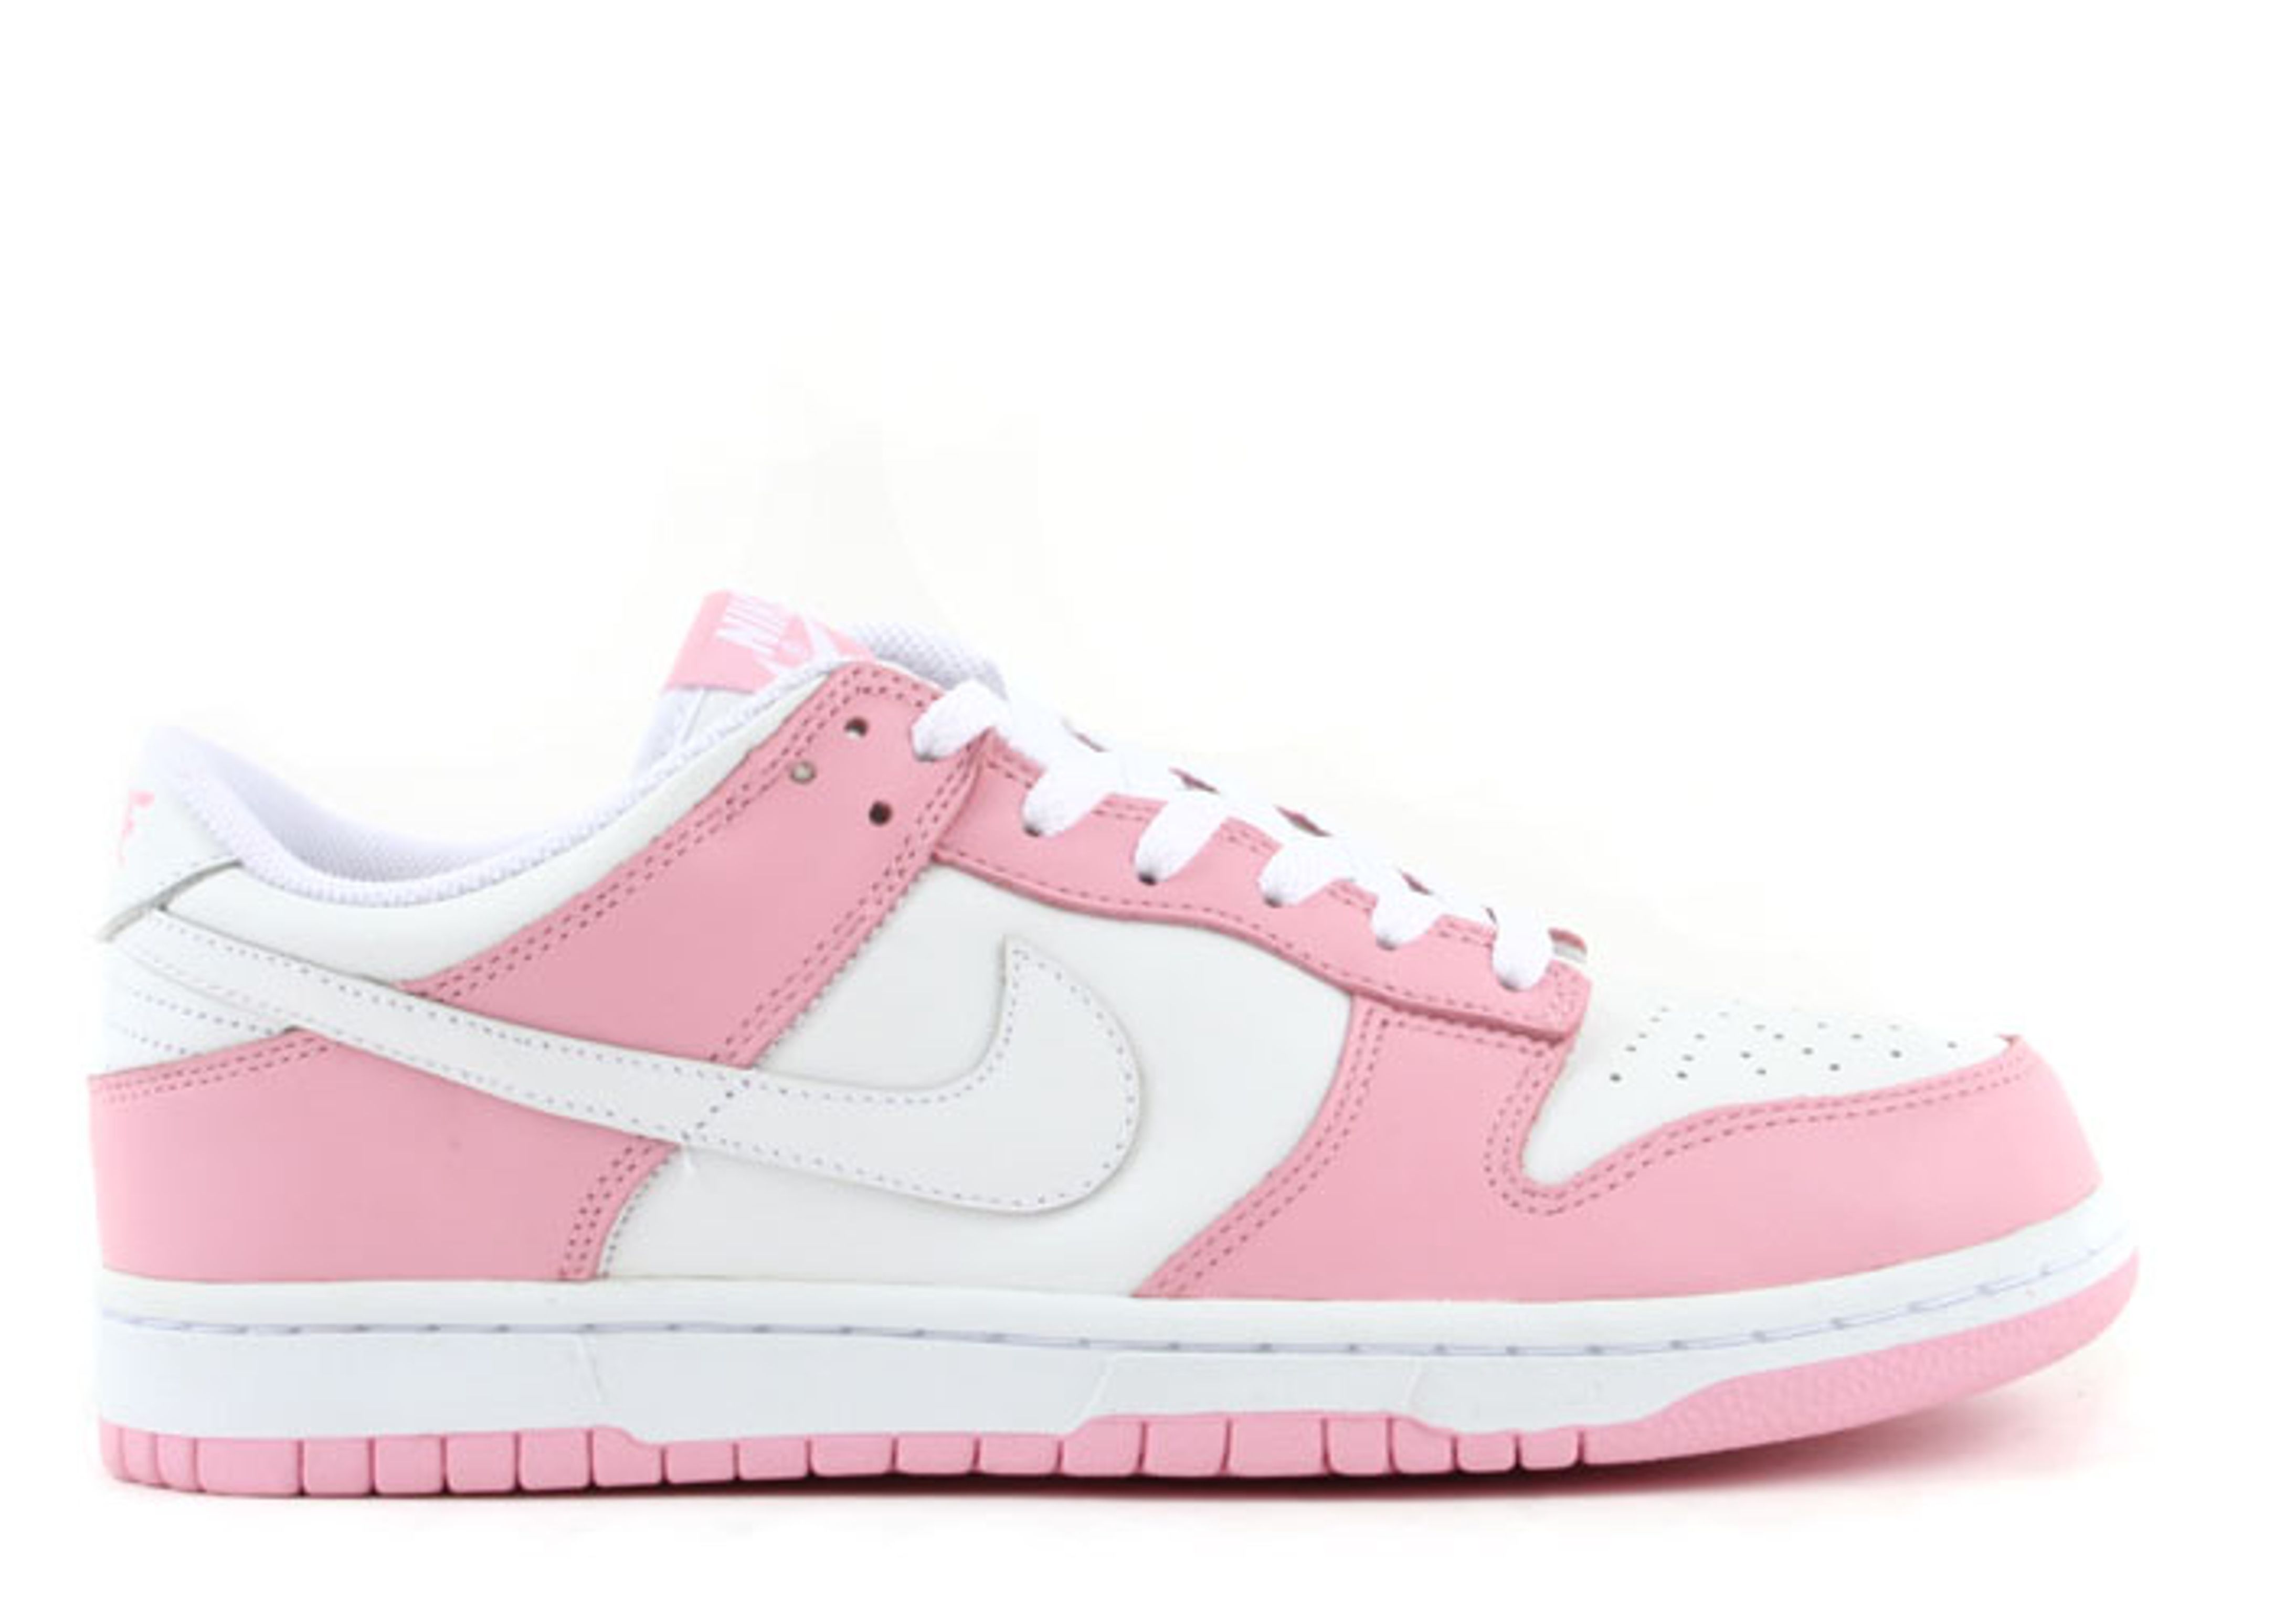 Wmns Dunk Low - Nike - 309324 613 - real pink/white | Flight Club